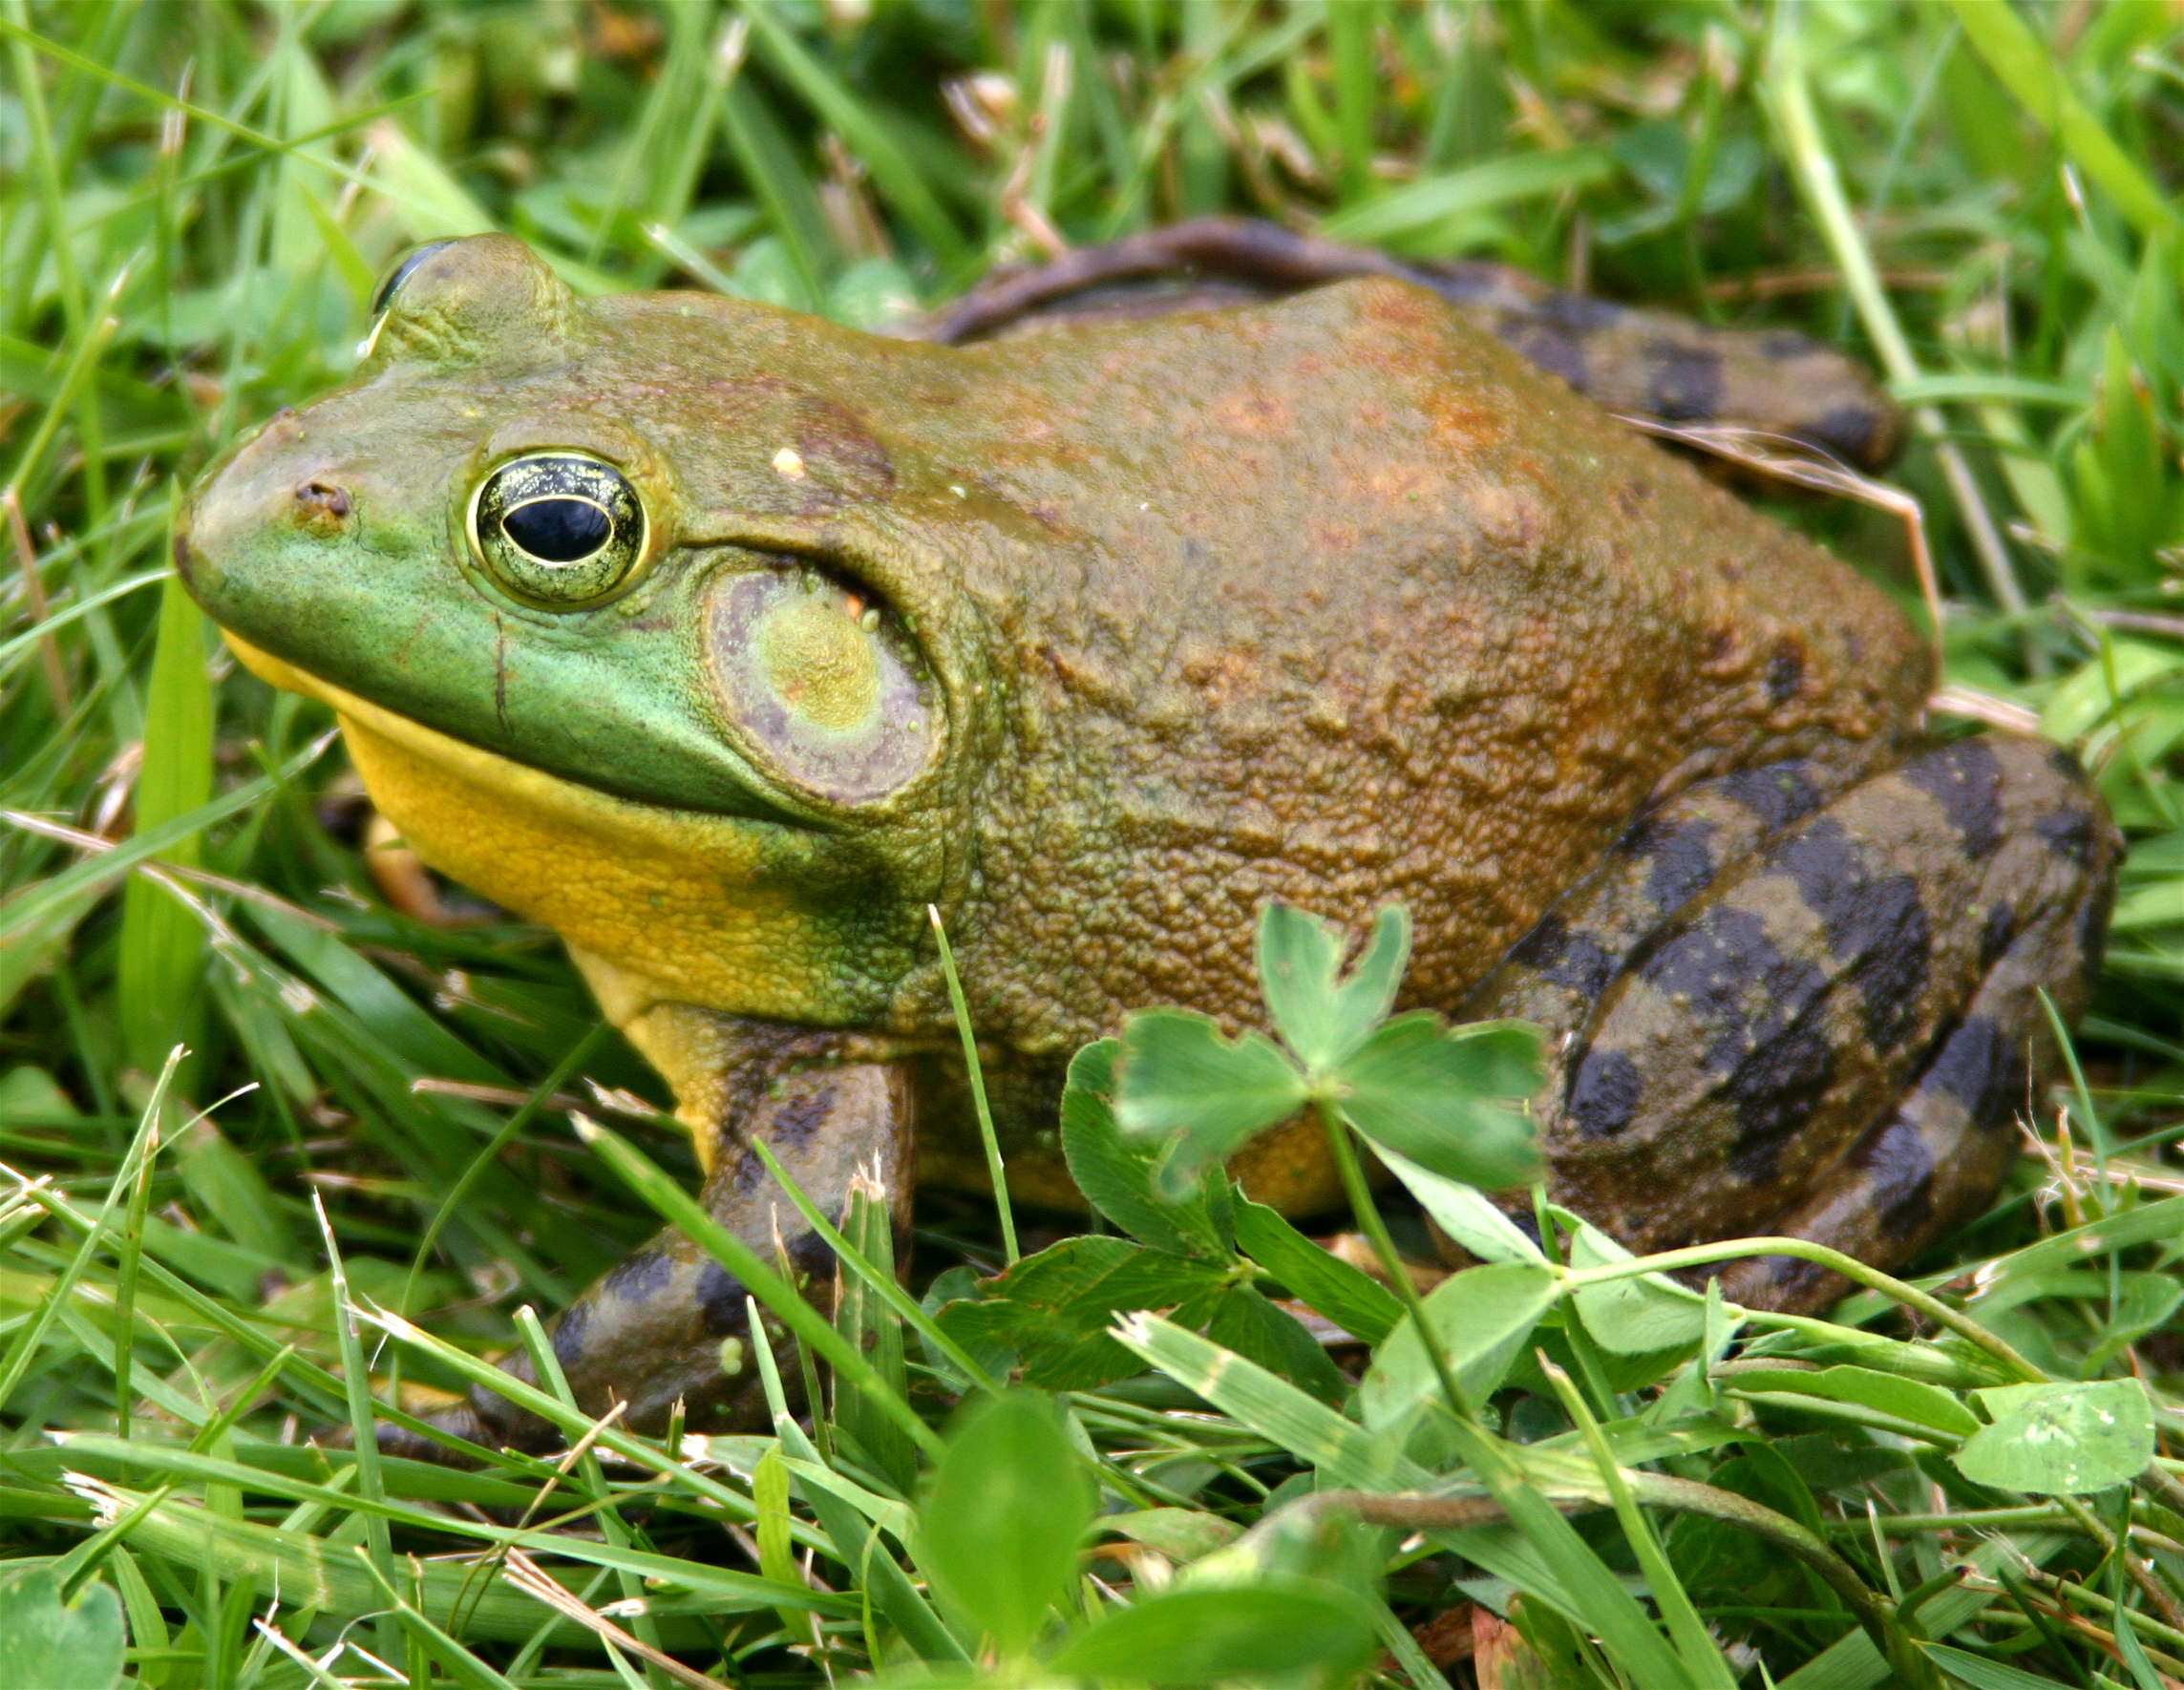 What is the common name for a bullfrog?